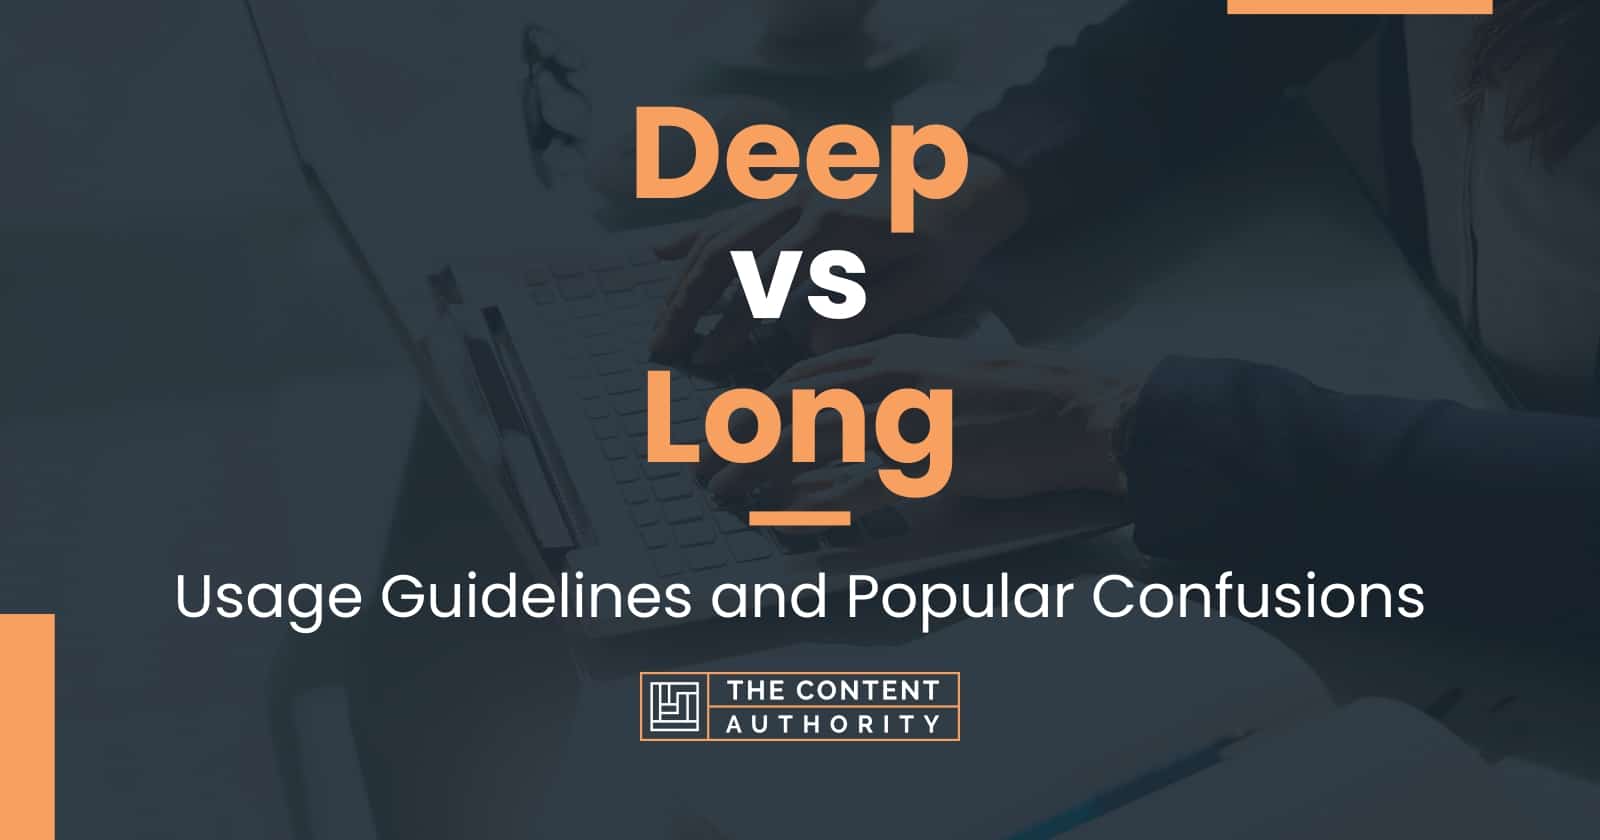 Deep vs Long: Usage Guidelines and Popular Confusions